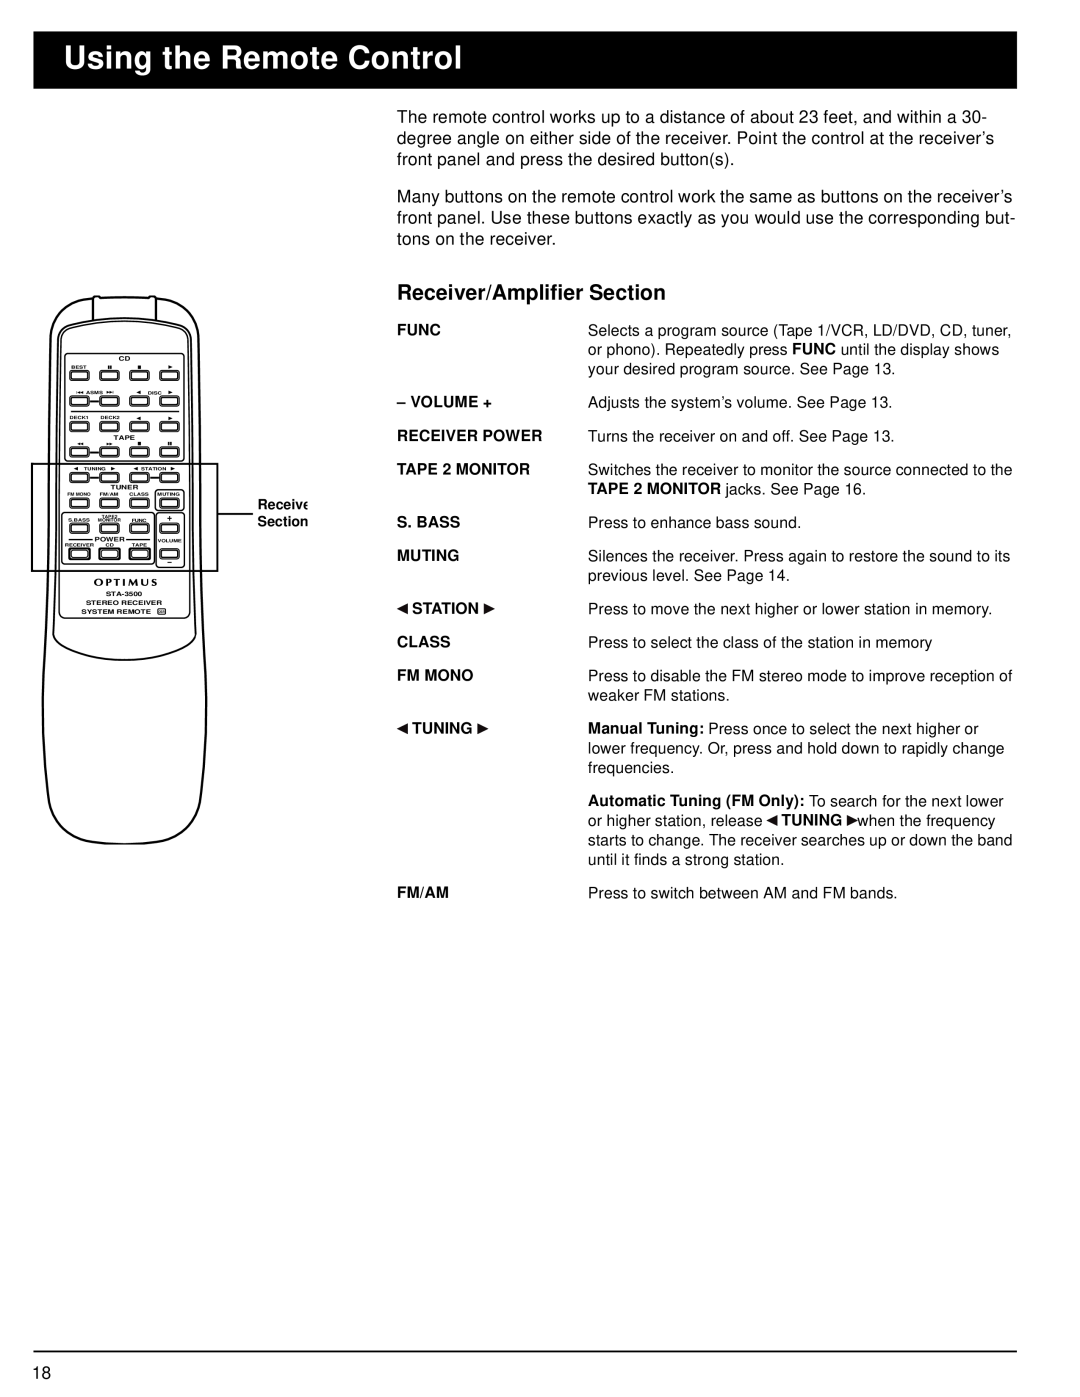 Optimus STA-3500 owner manual Using the Remote Control, Receiver/Amplifier Section 